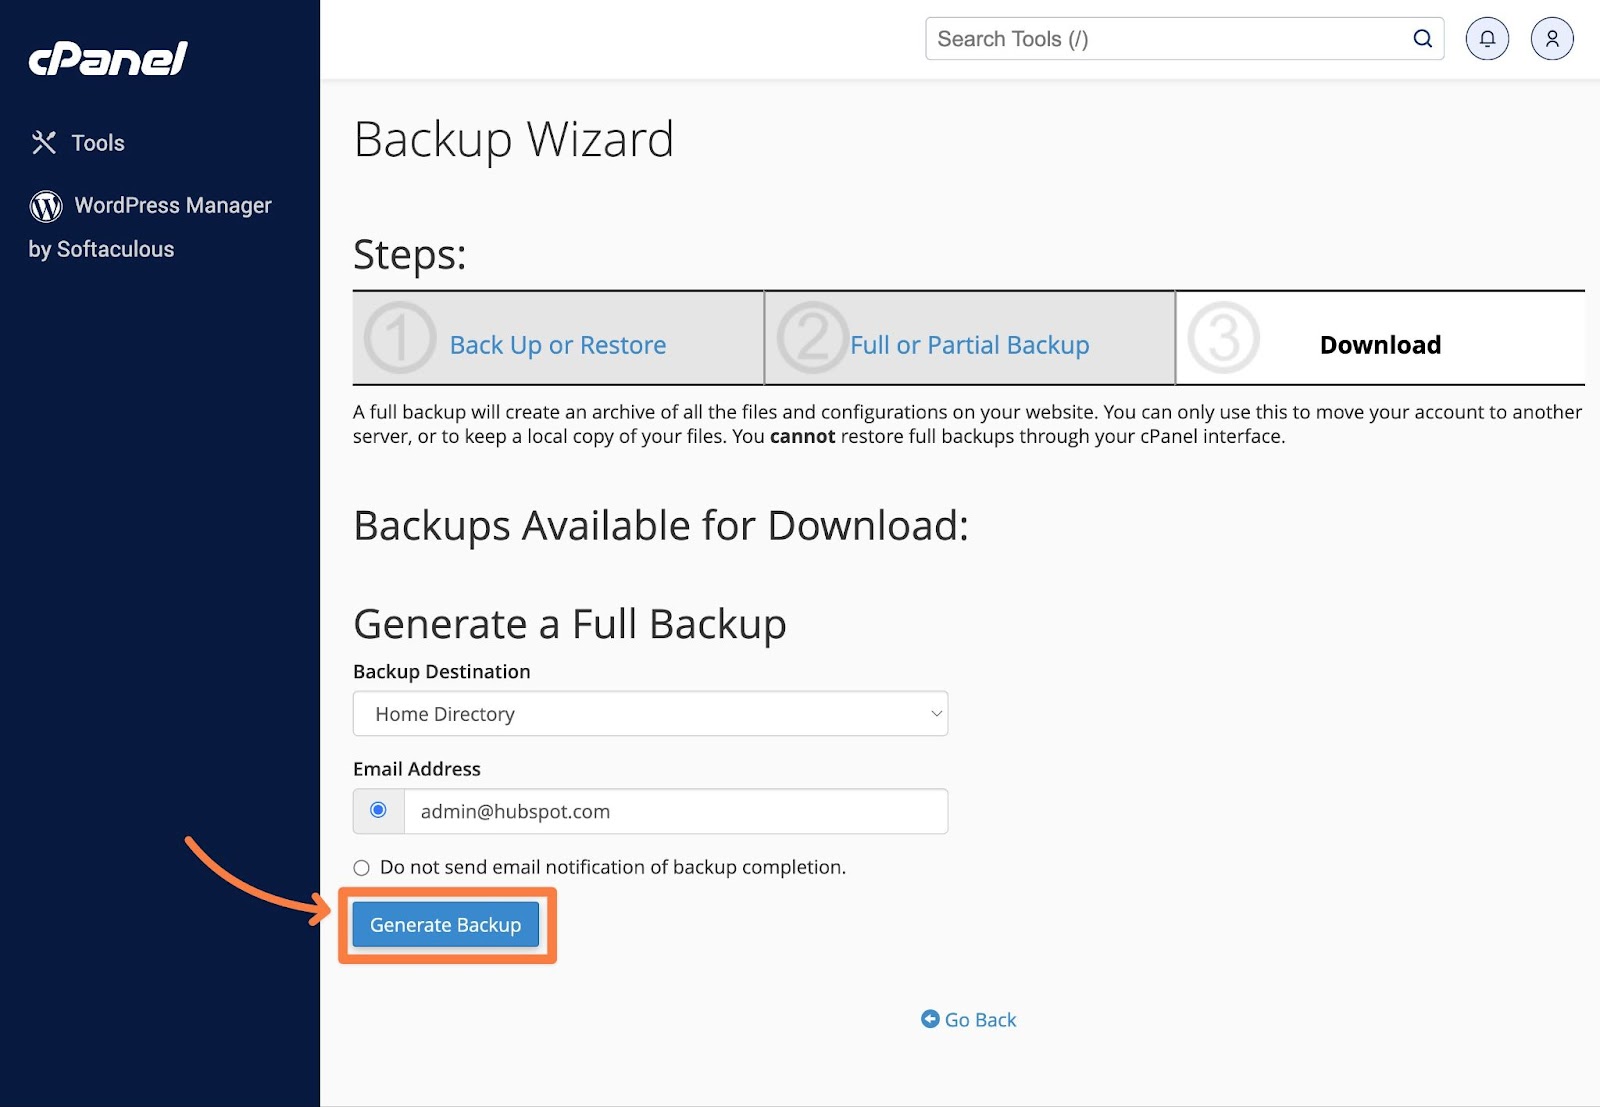 Click the Generate Backup button to finalize your backup.